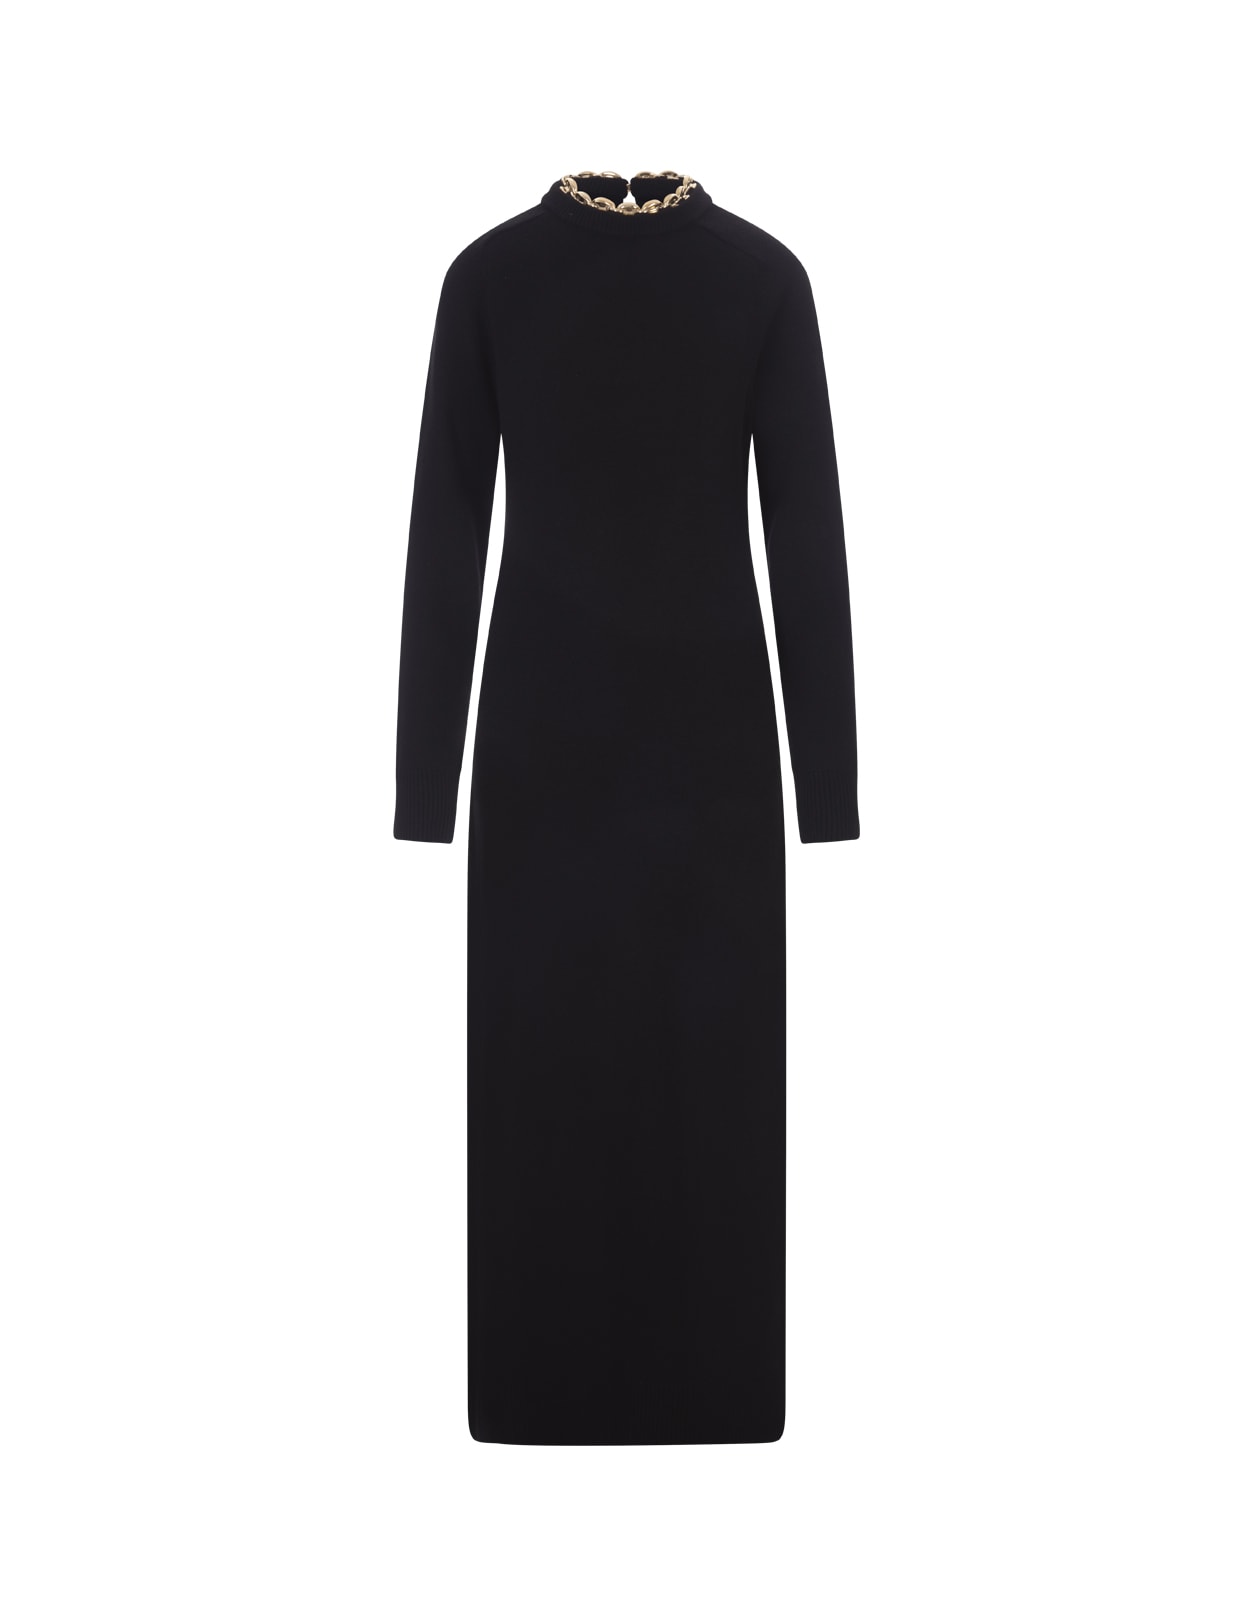 Paco Rabanne Black Long Dress With Chain On Neckline